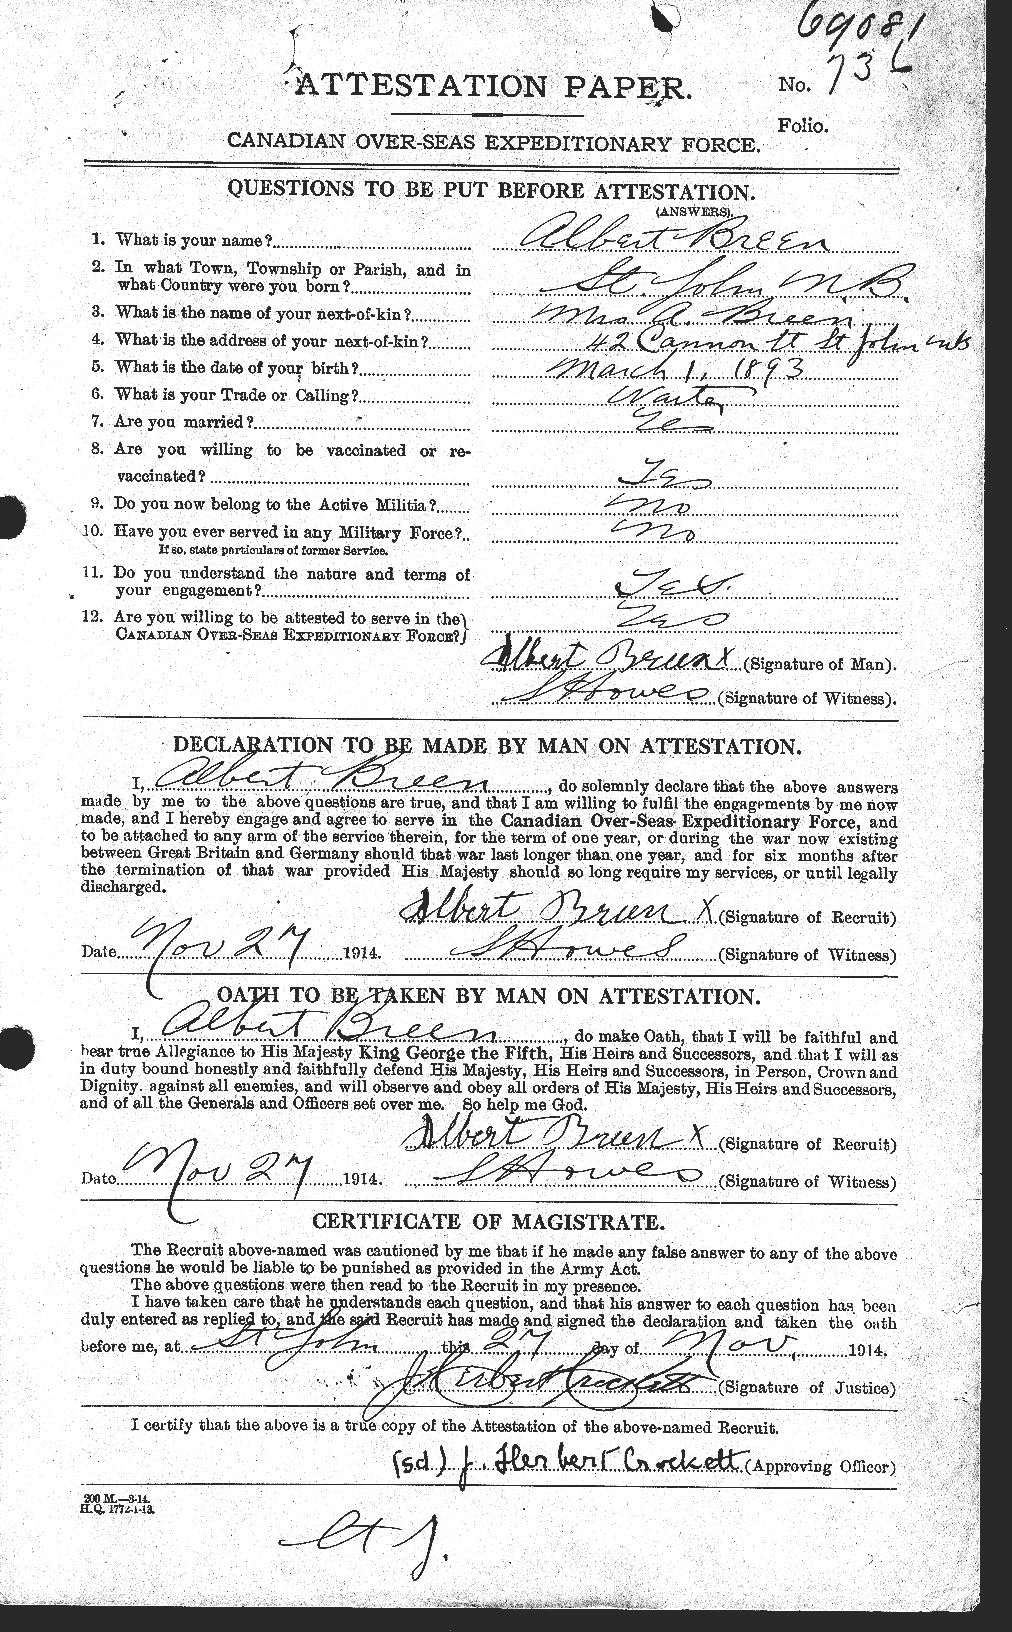 Personnel Records of the First World War - CEF 263497a